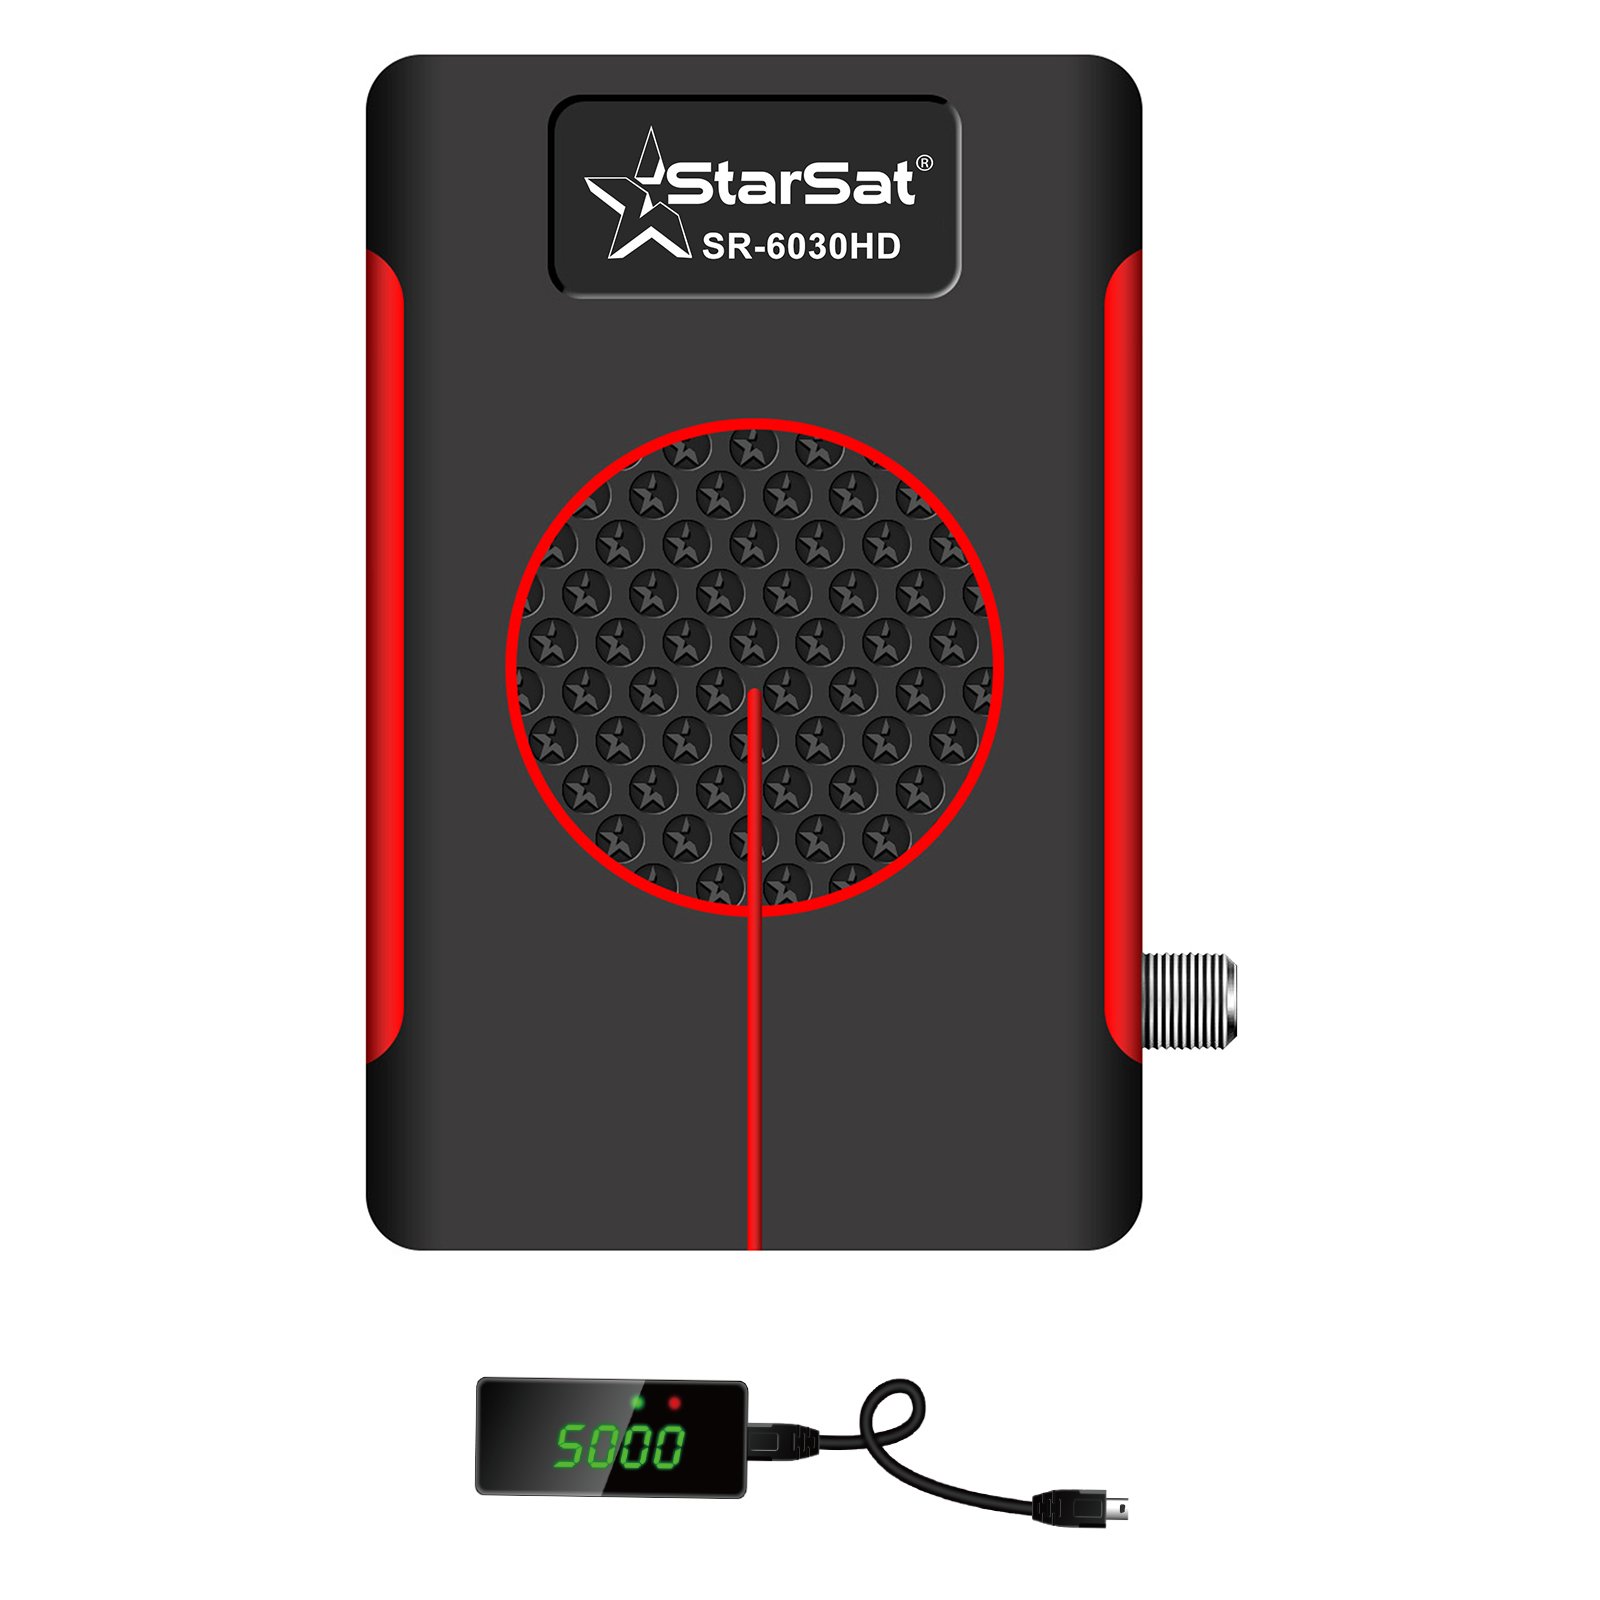 StarSat SR-6030HD Full HD1080, 2xUSB, HDMI, 6000 Channels, EPG, MPEG4, Blind Scan, PVR, DVBS2, WiFi Supported (WiFi device not include)